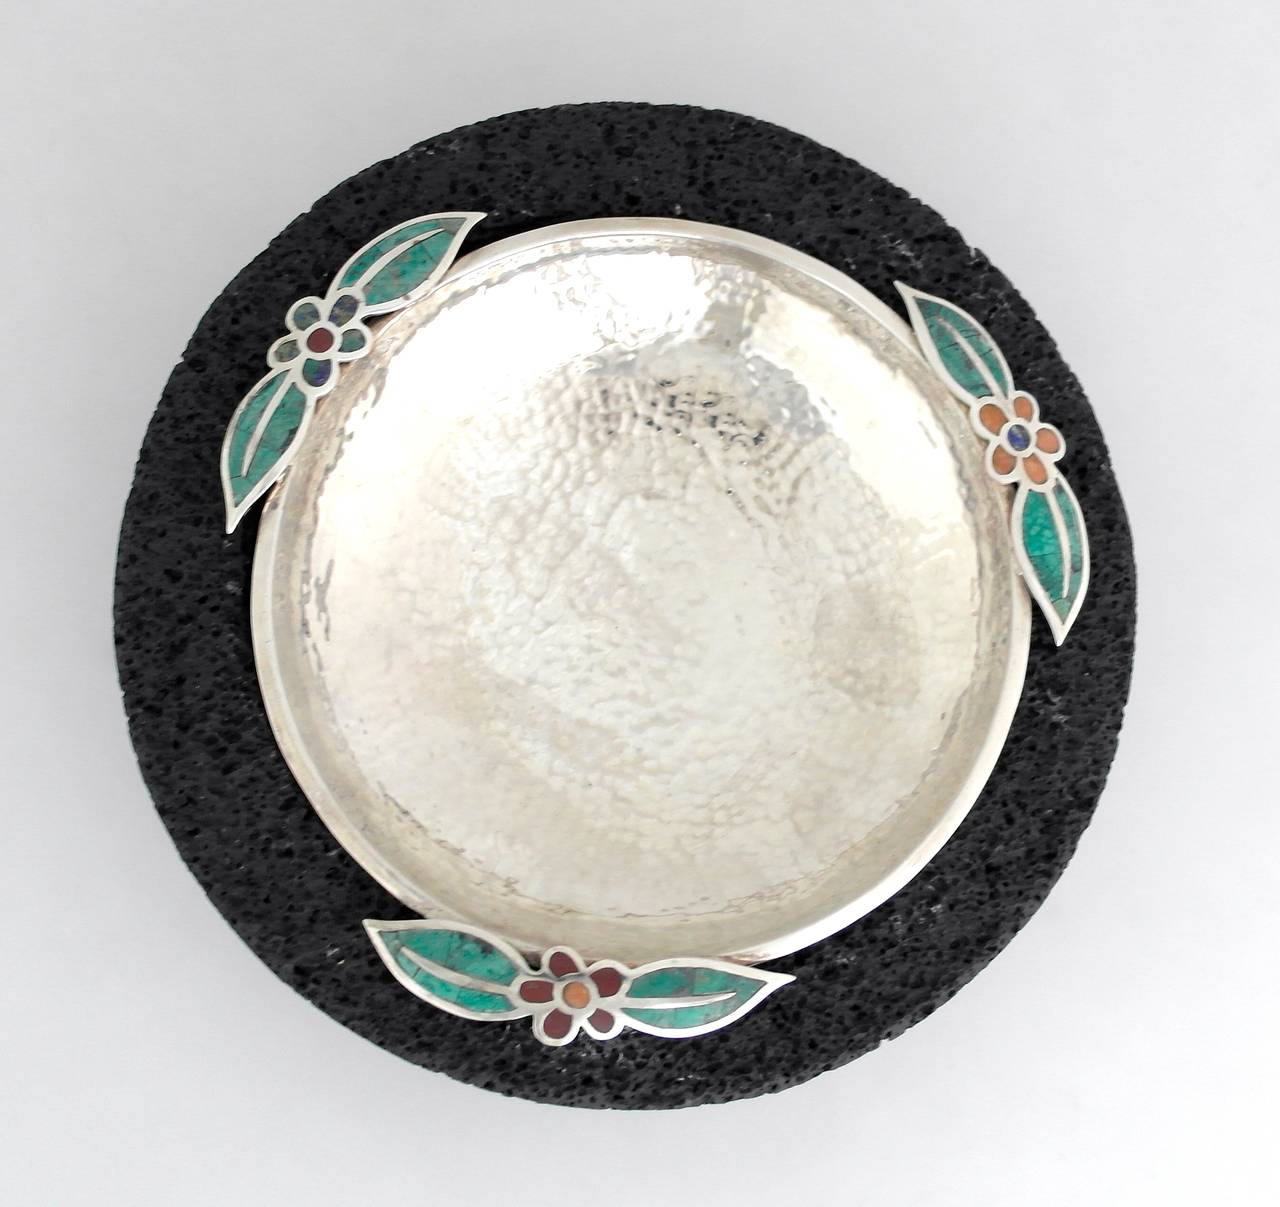 Being offered is a circa 1990 serving bowl by Emilia Castillo of Taxco, Mexico. Hammered bowl with three floral motifs, placed in a lava rock formed bowl. Silver bowl is removable for cleaning. Dimensions: 10 inches diameter. Marked as illustrated.